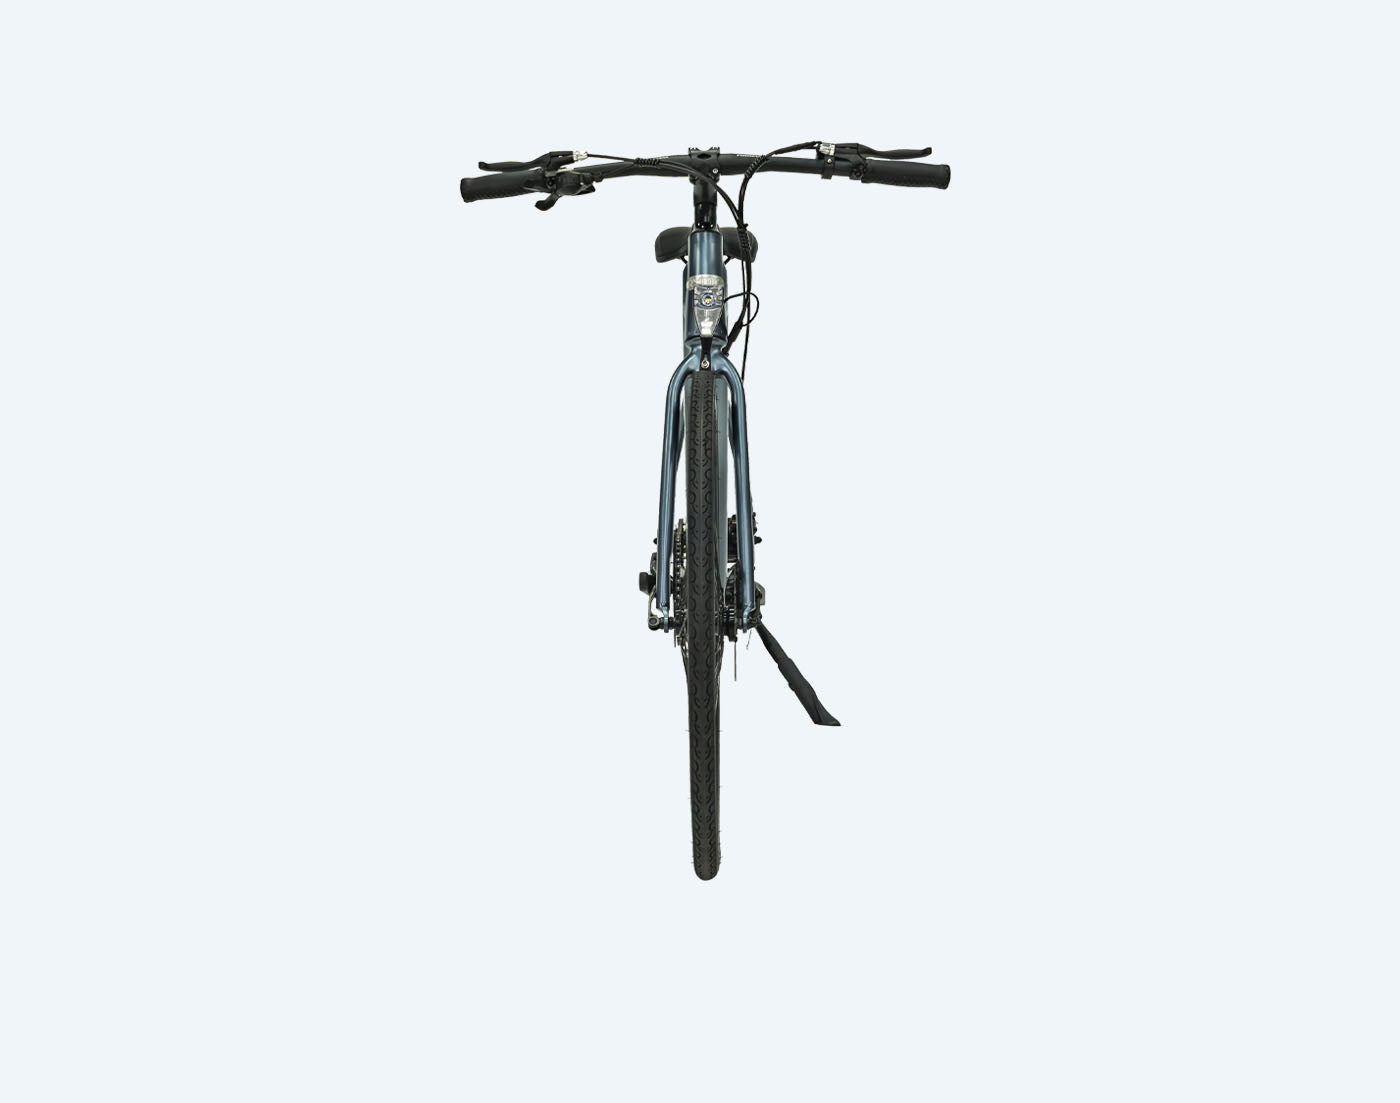 Rymic Infinity 3 Commuter E-Bike (Pre-sale stage, takes 60 days to arrive)